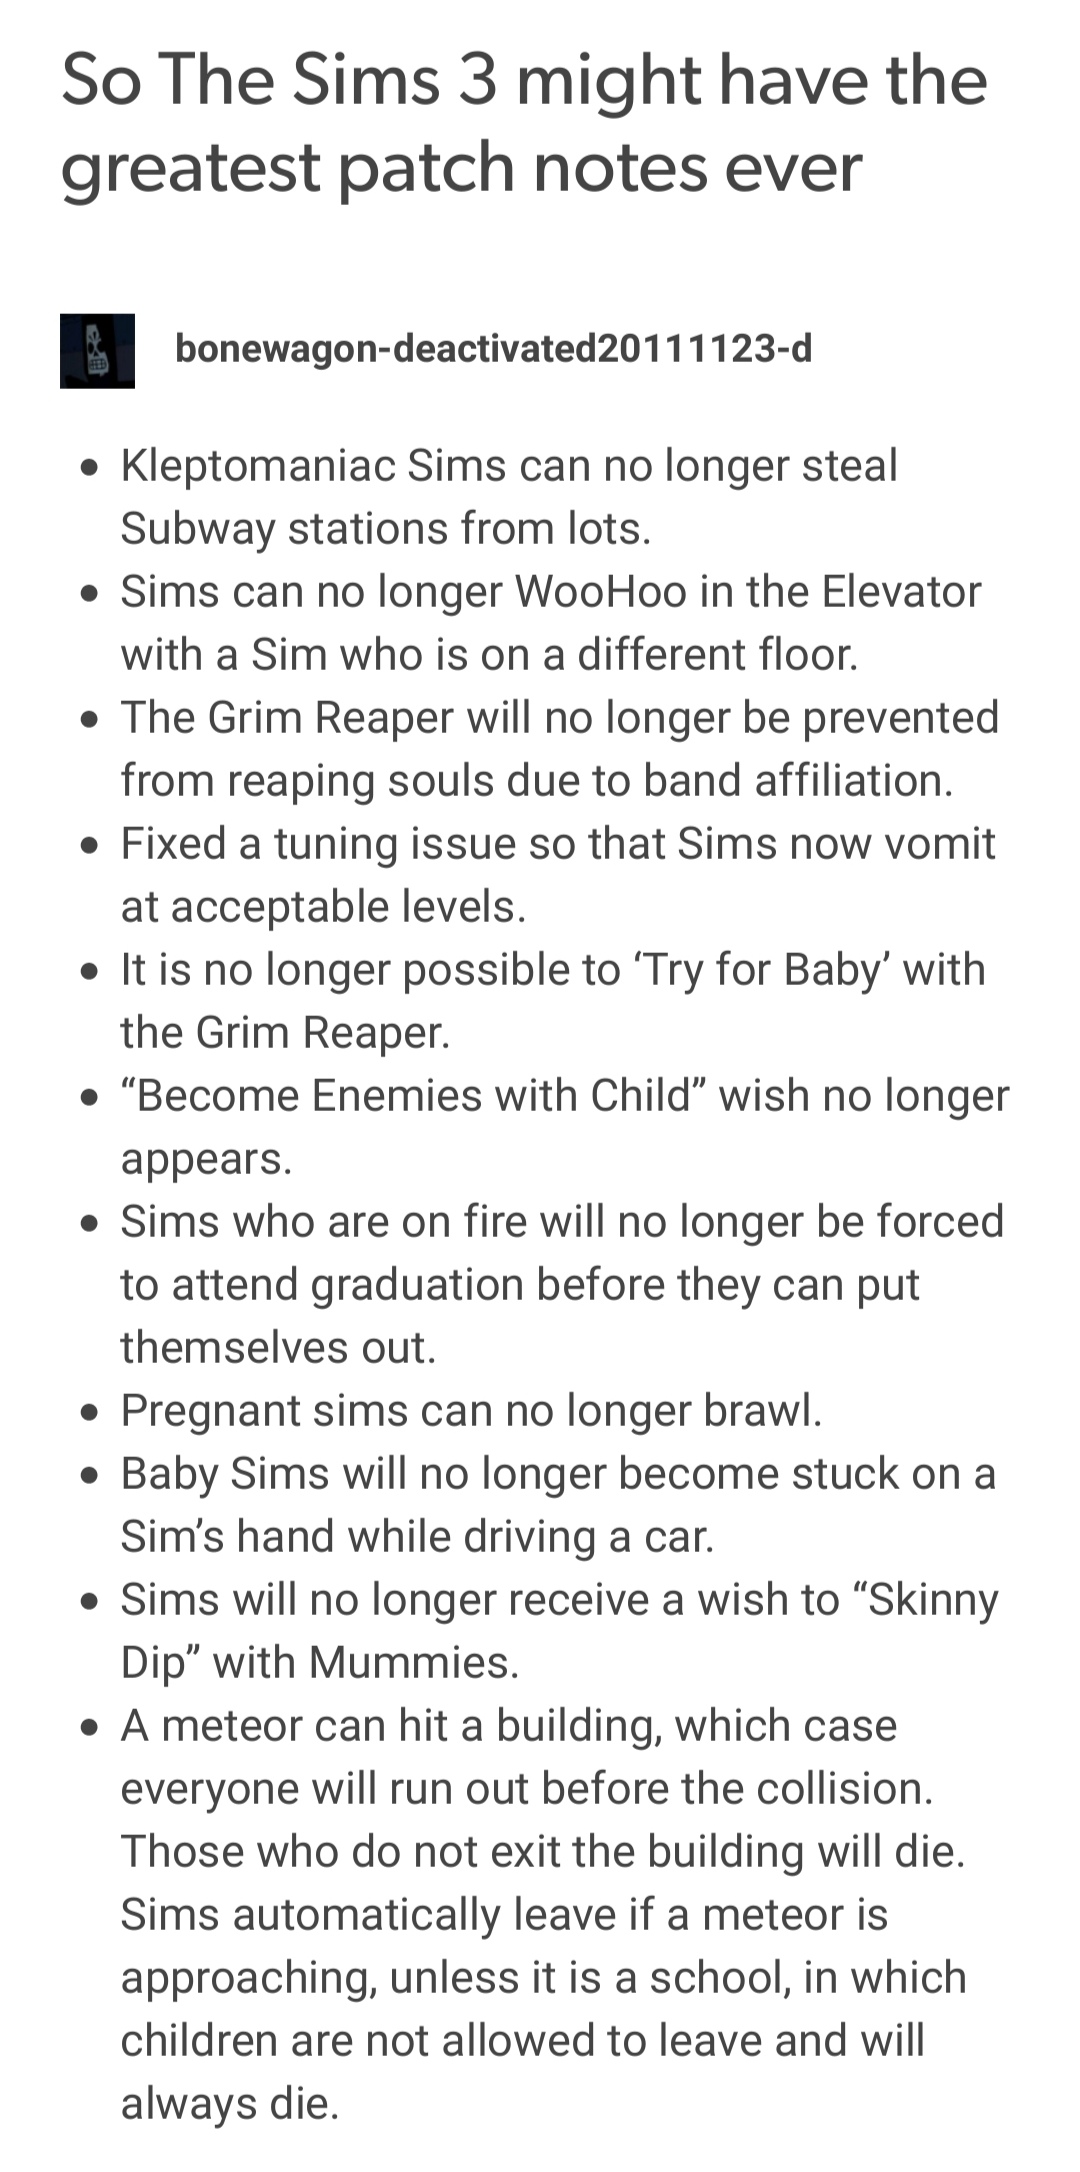 the sims 3 patches